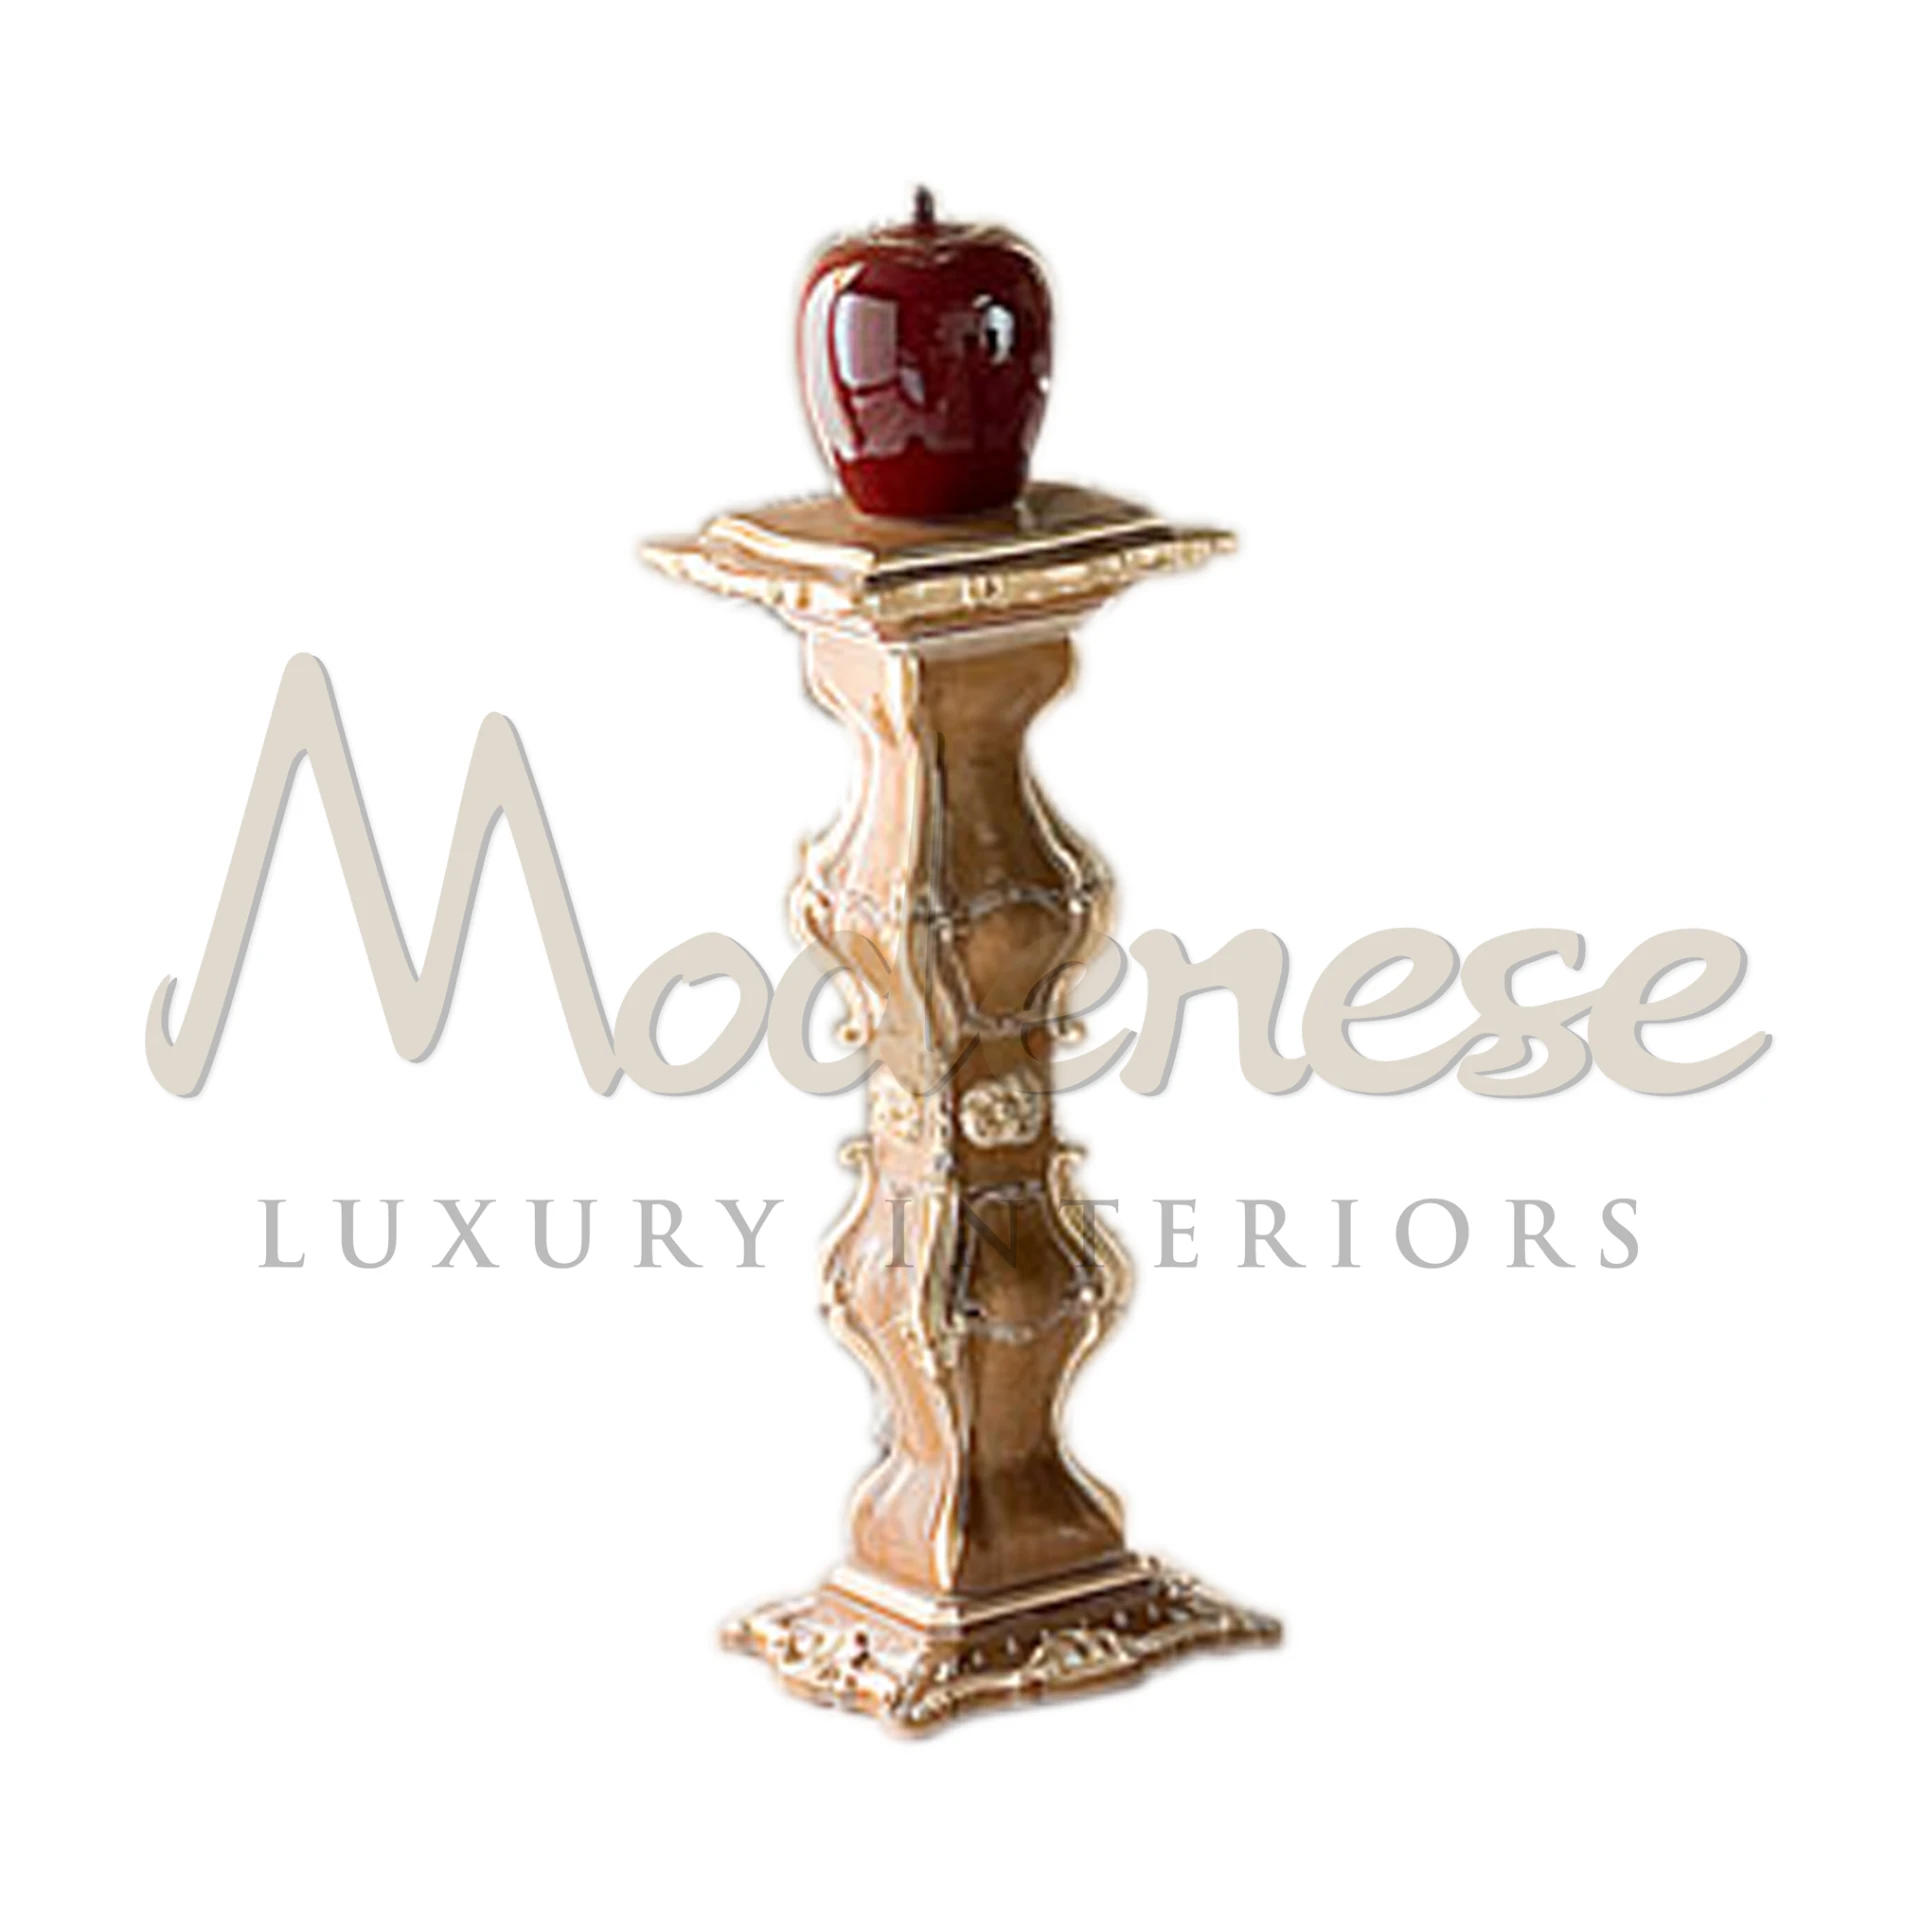 Classic Hand-Made Vase Stand in gold finish, turning spaces into art with its exquisite walnut craftsmanship.